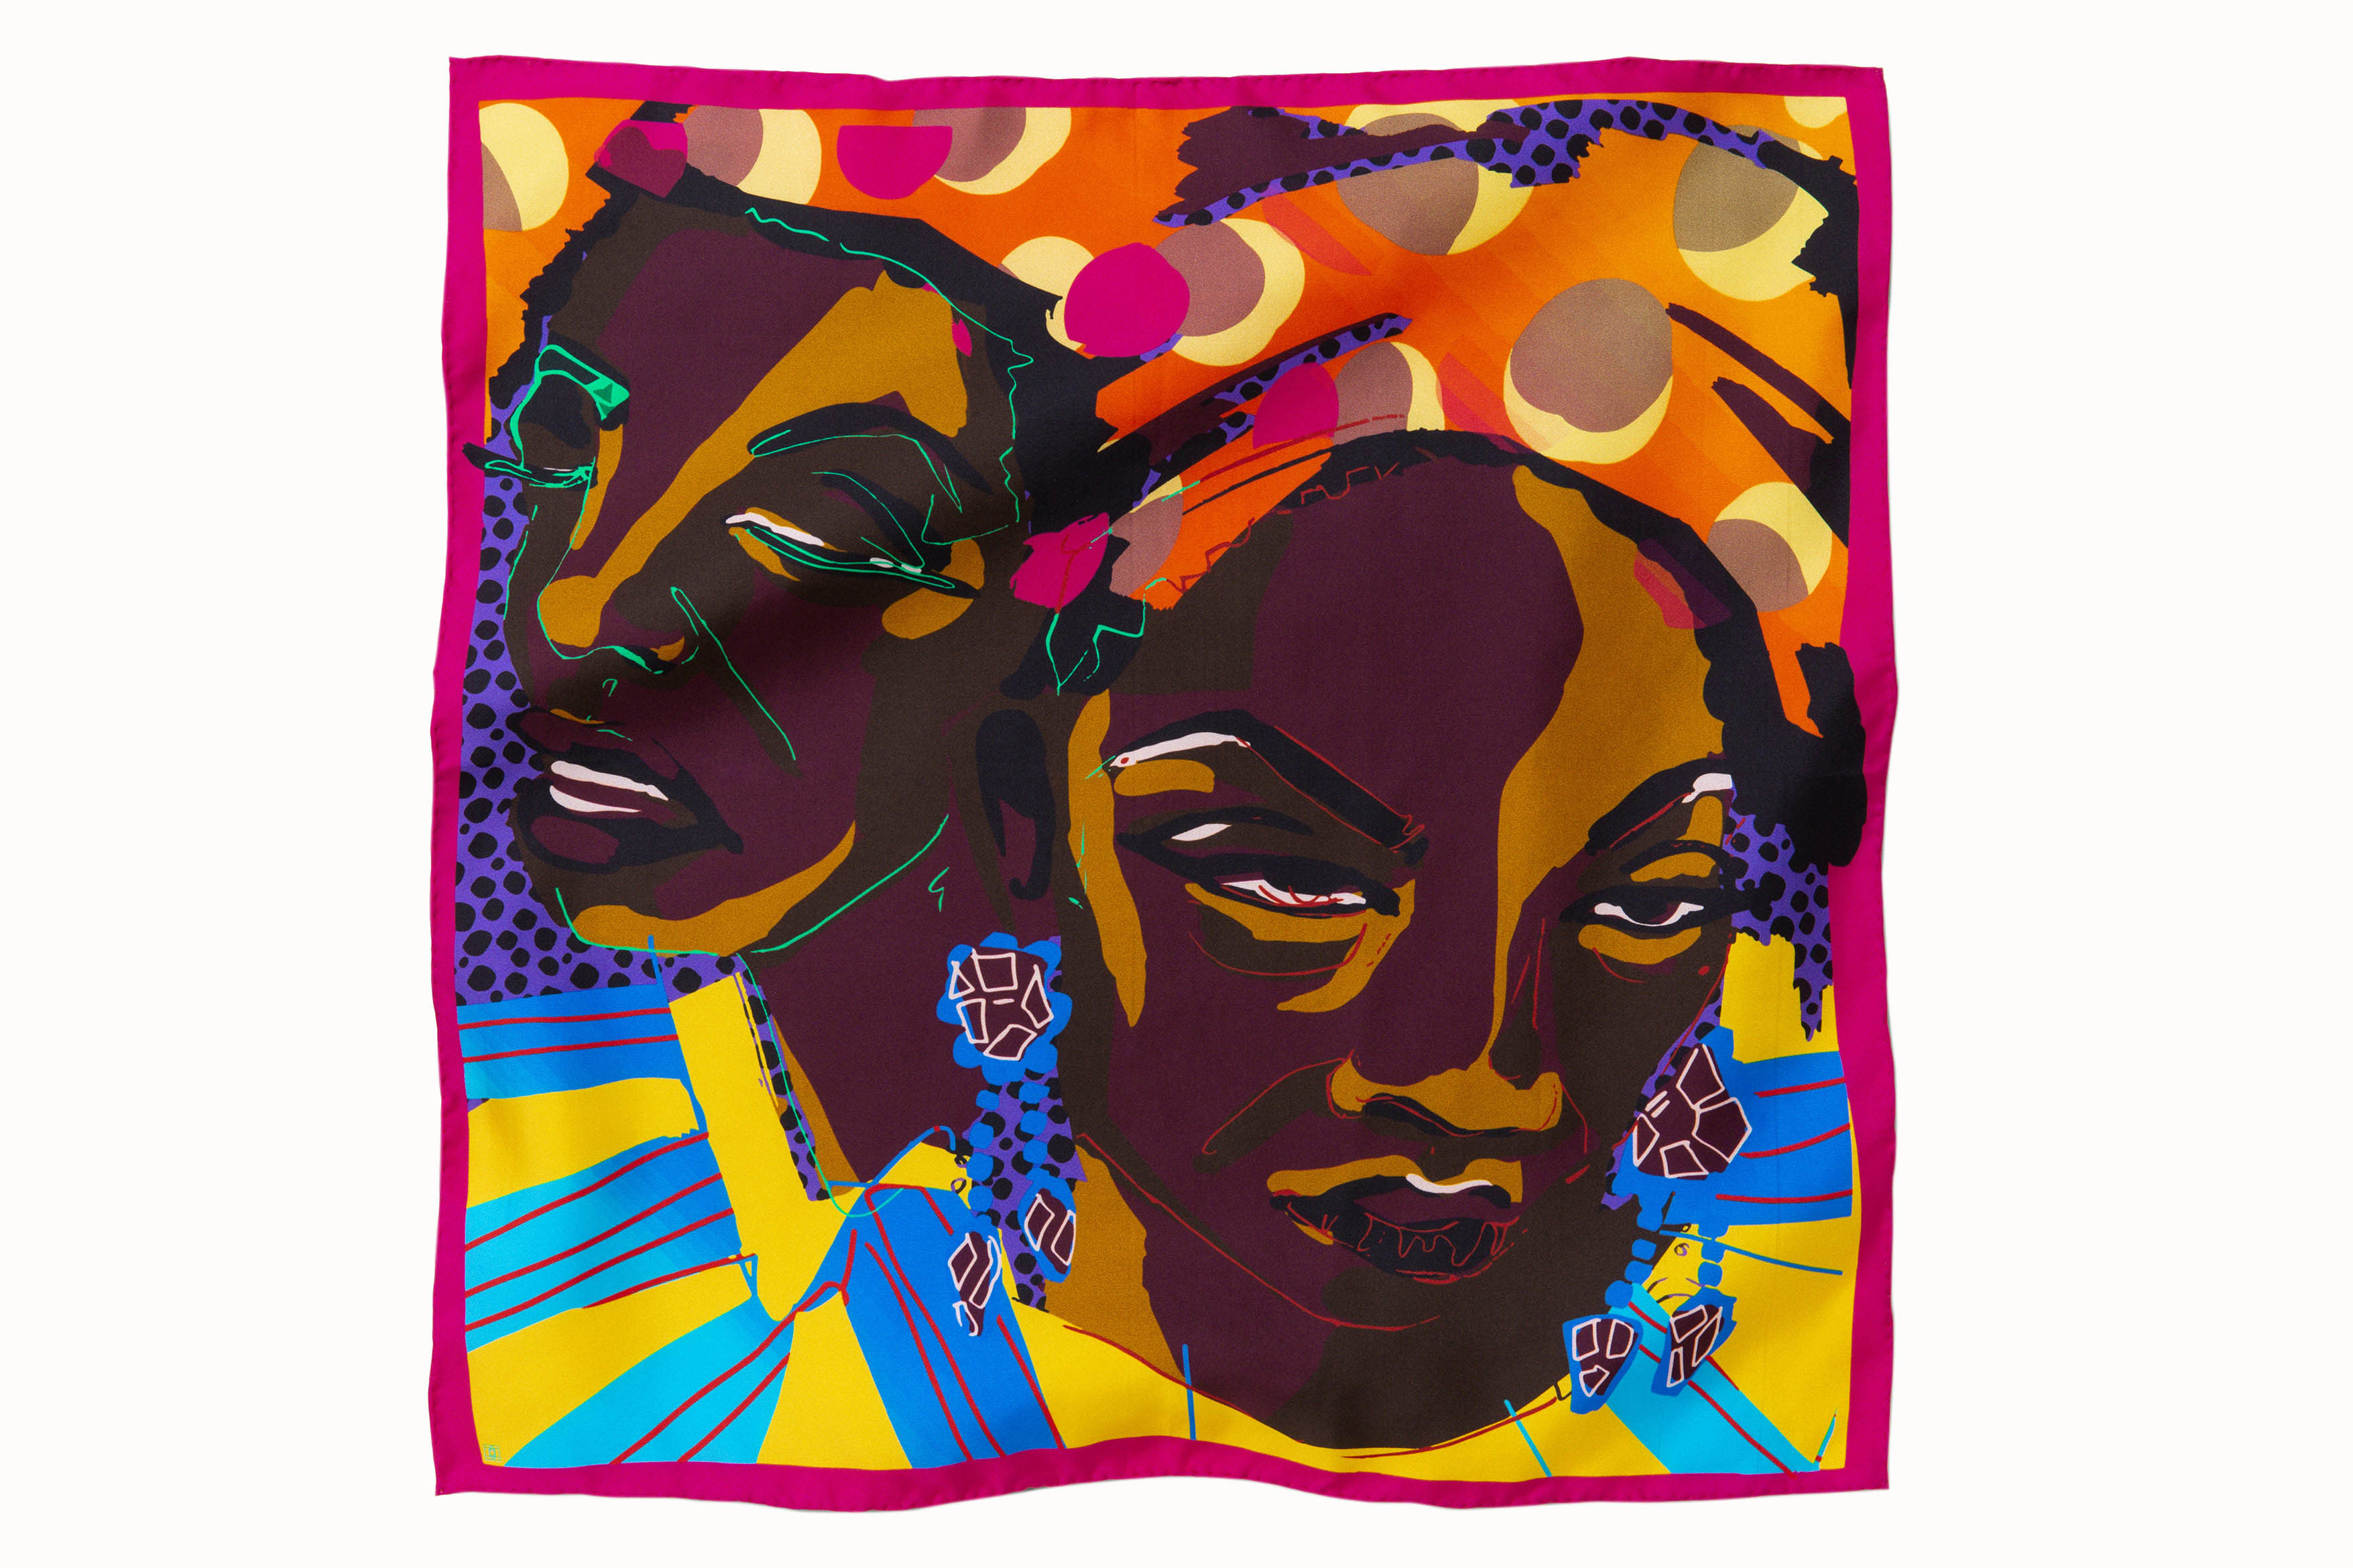 Flatlay image of 100% silk square scarf featuring the artist’s portrait of Nina Simone surrounded by bold geometric shapes and featuring such colors as tangerine, citrus yellow, bright blue, burgundy and deep mahogany.